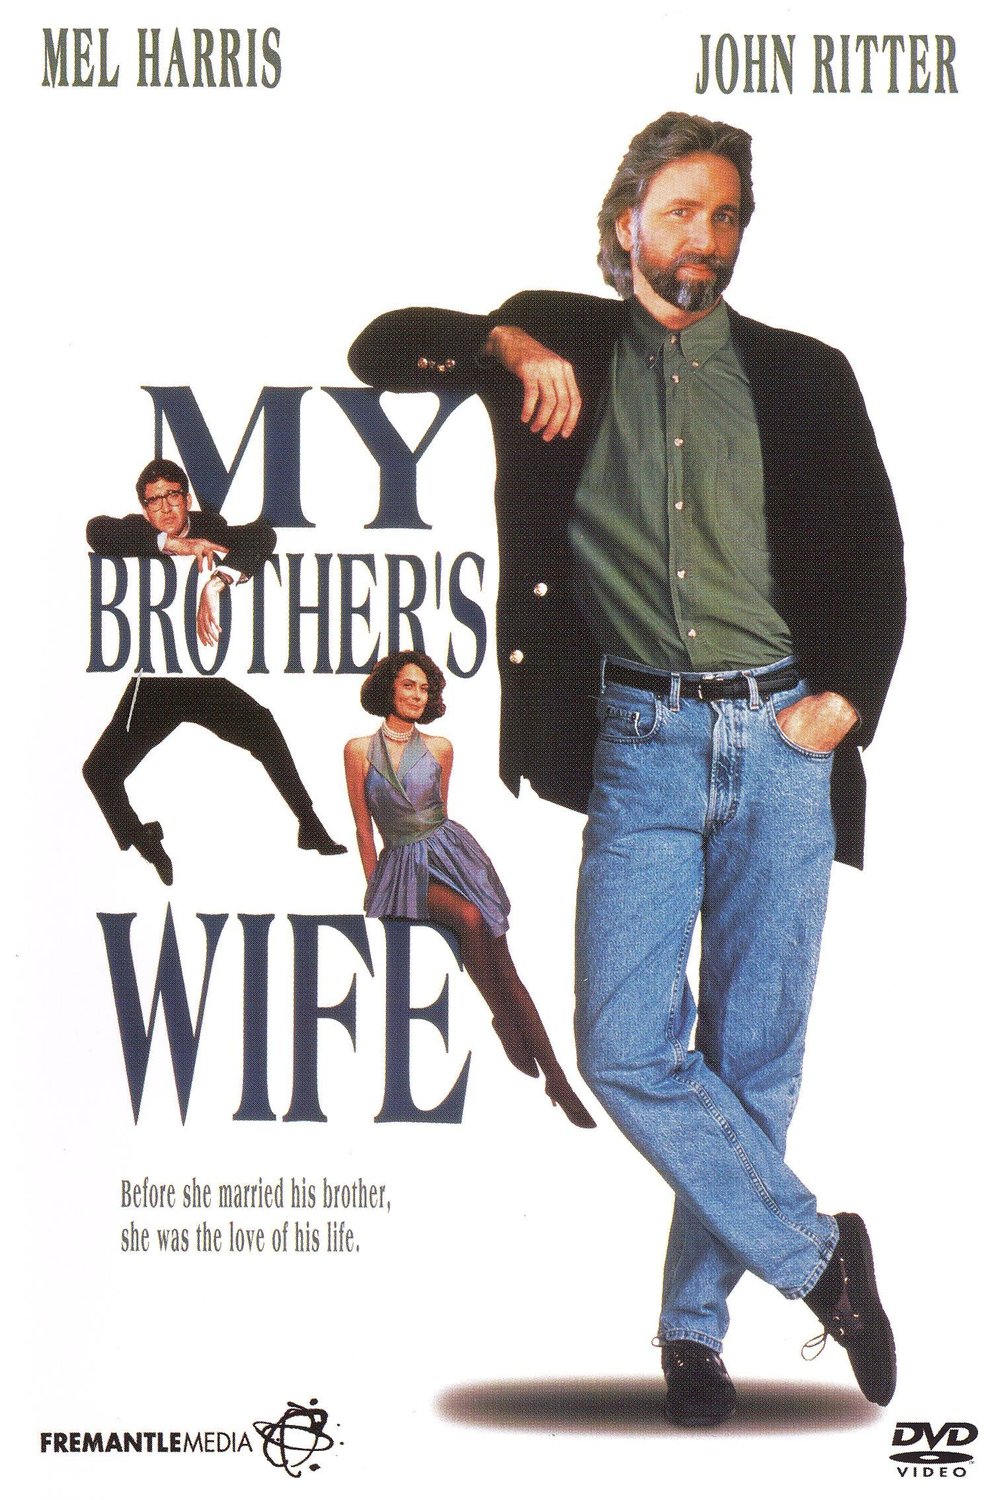 Poster of the movie My Brother's Wife